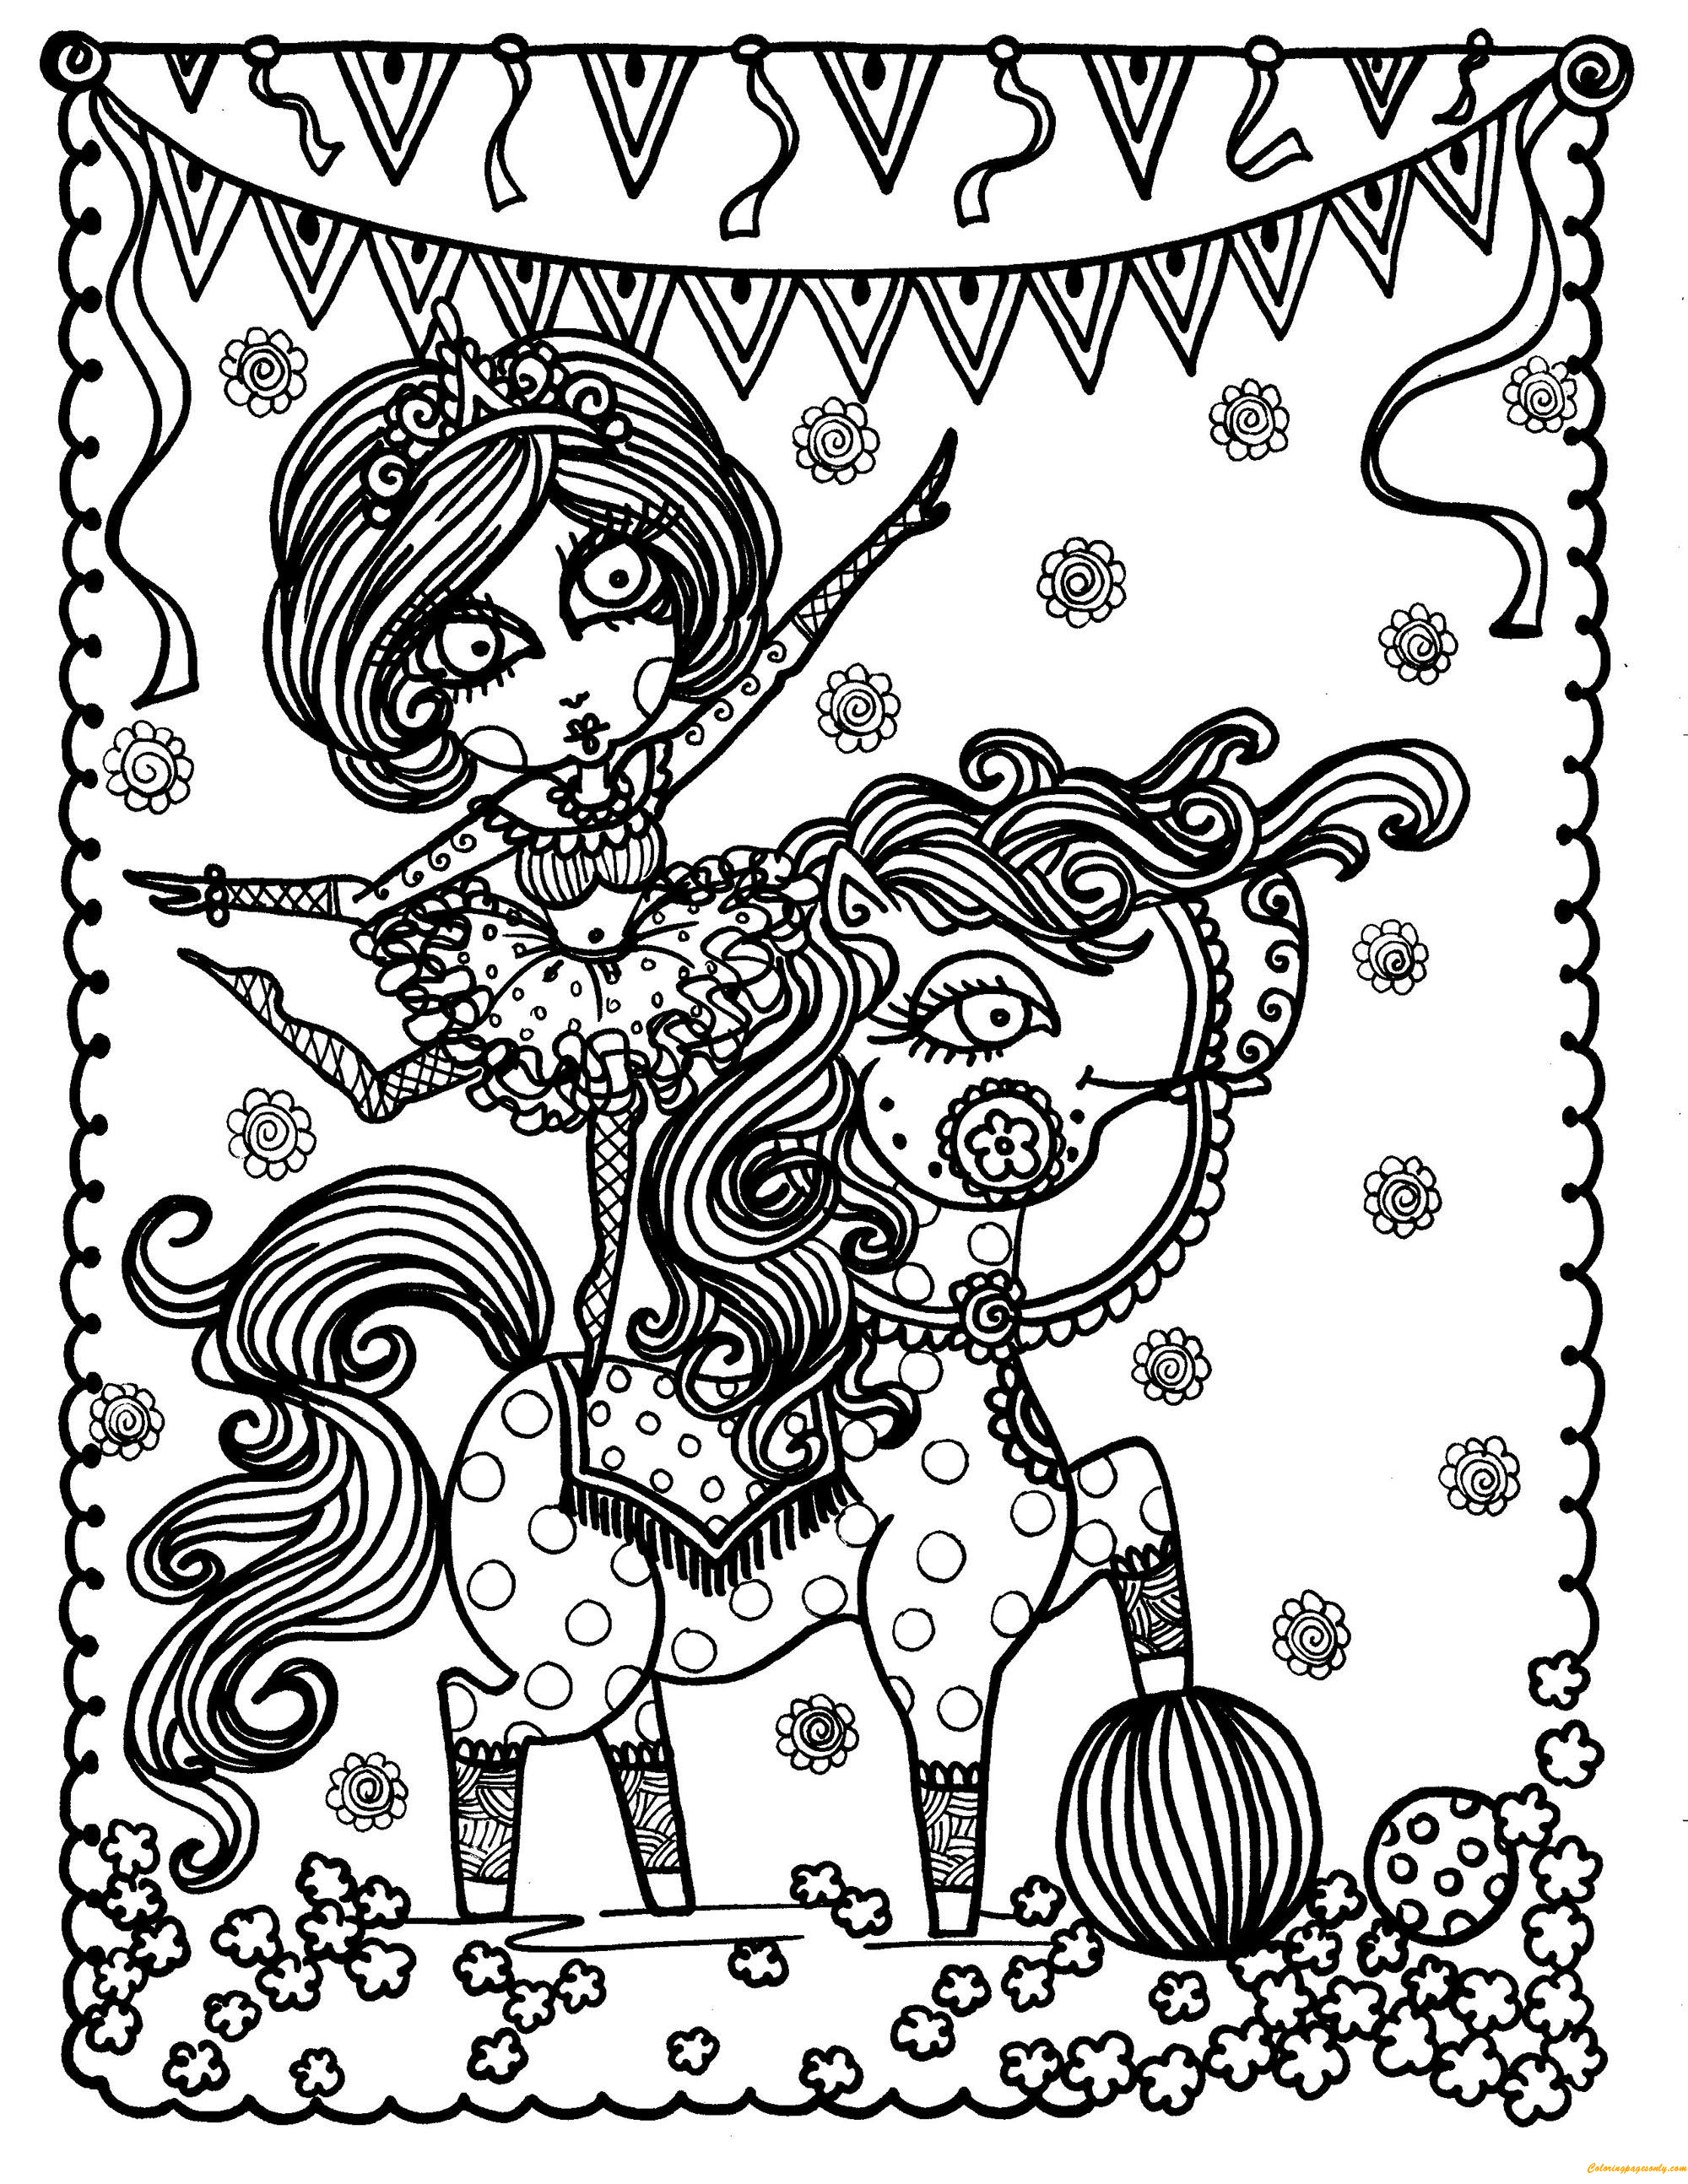 The Girl And Horse Circus Show Coloring Pages